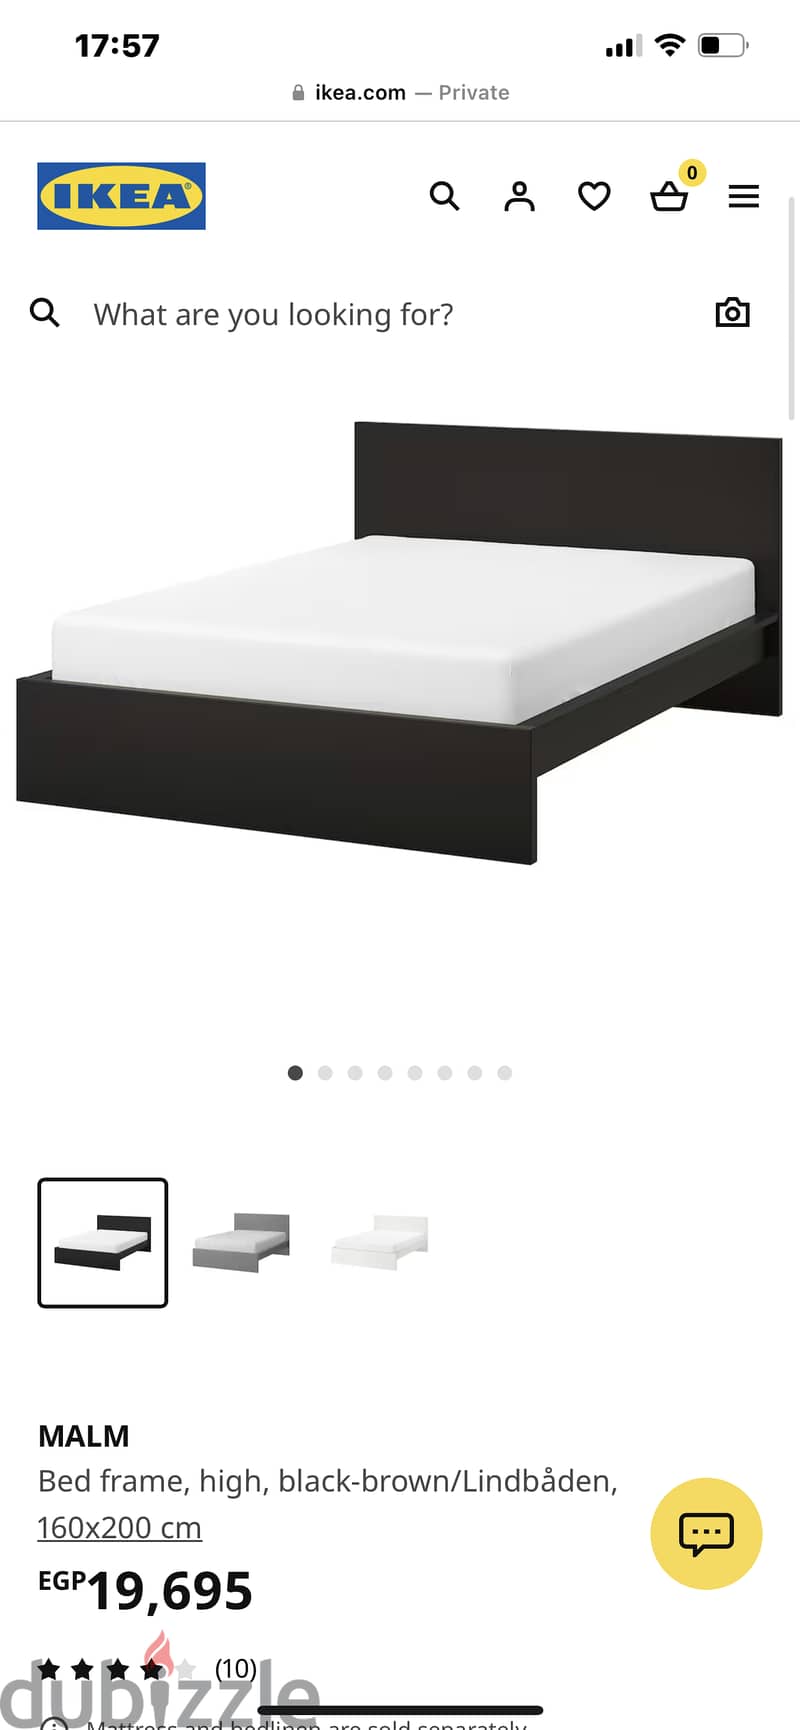 BRAND NEW, NEVER USED, RIGHT OUT OF BOX IKEA 160x200 MALM BED 2